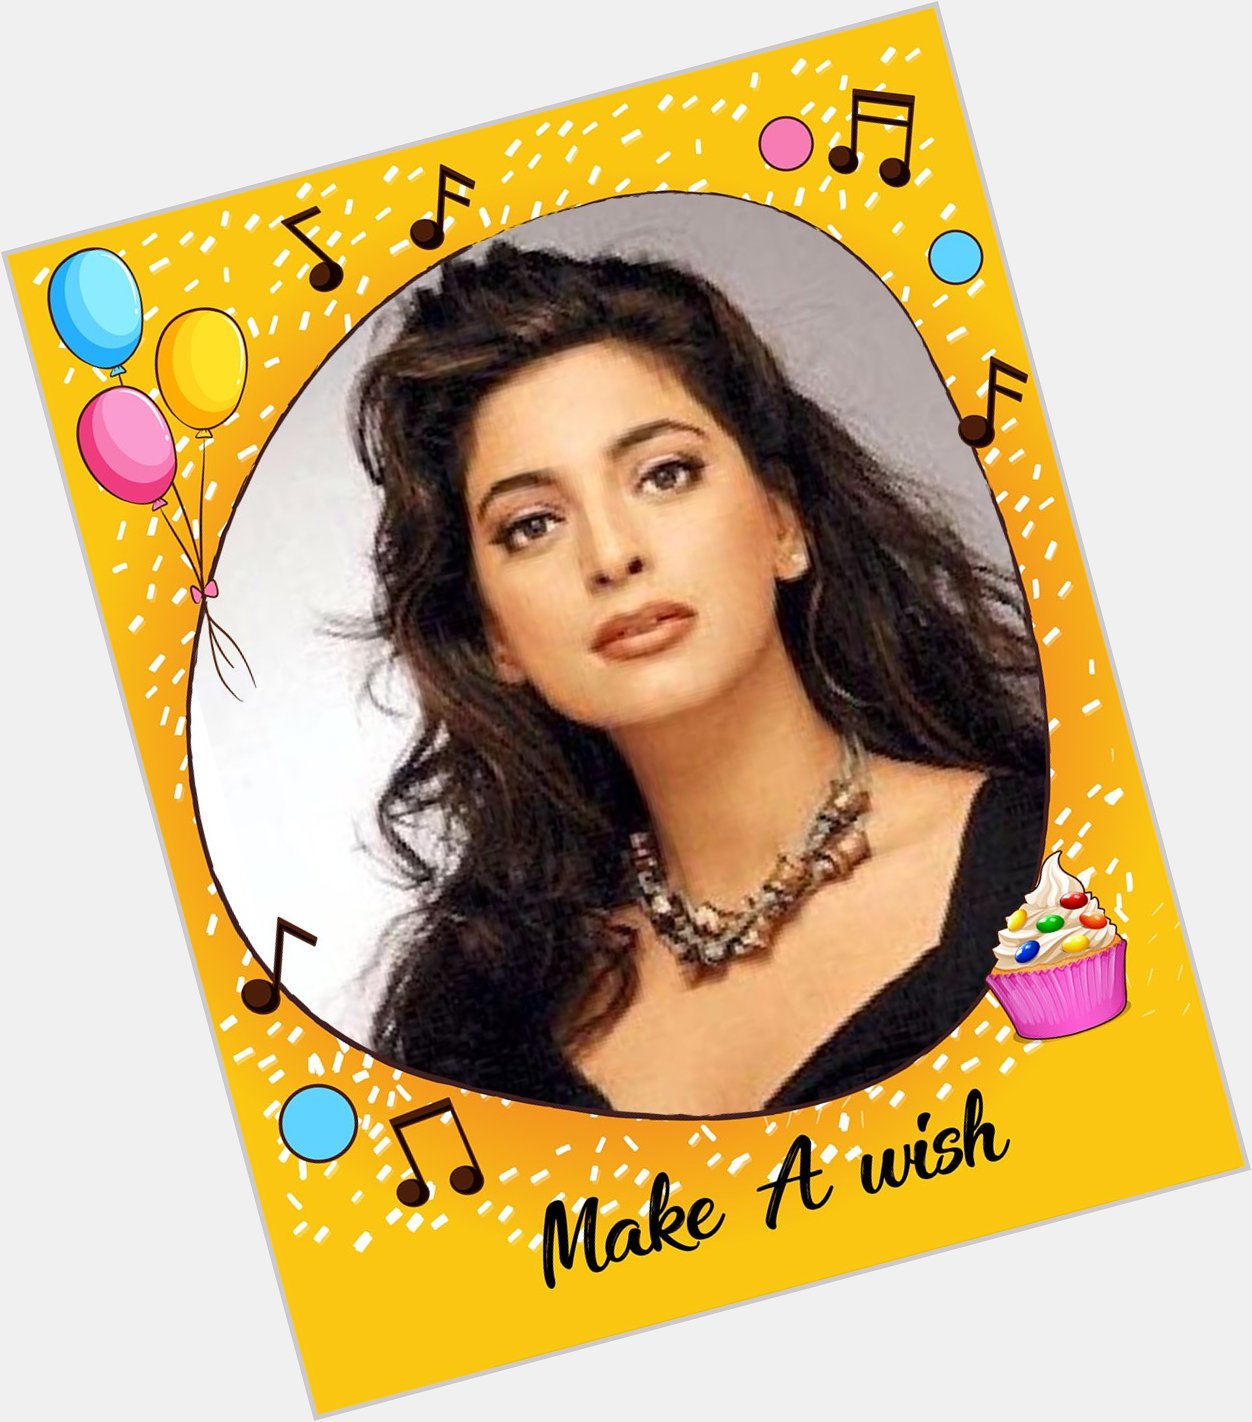 Happy birthday to the noted actress of Bollywood film industry, Juhi Chawla!!!  